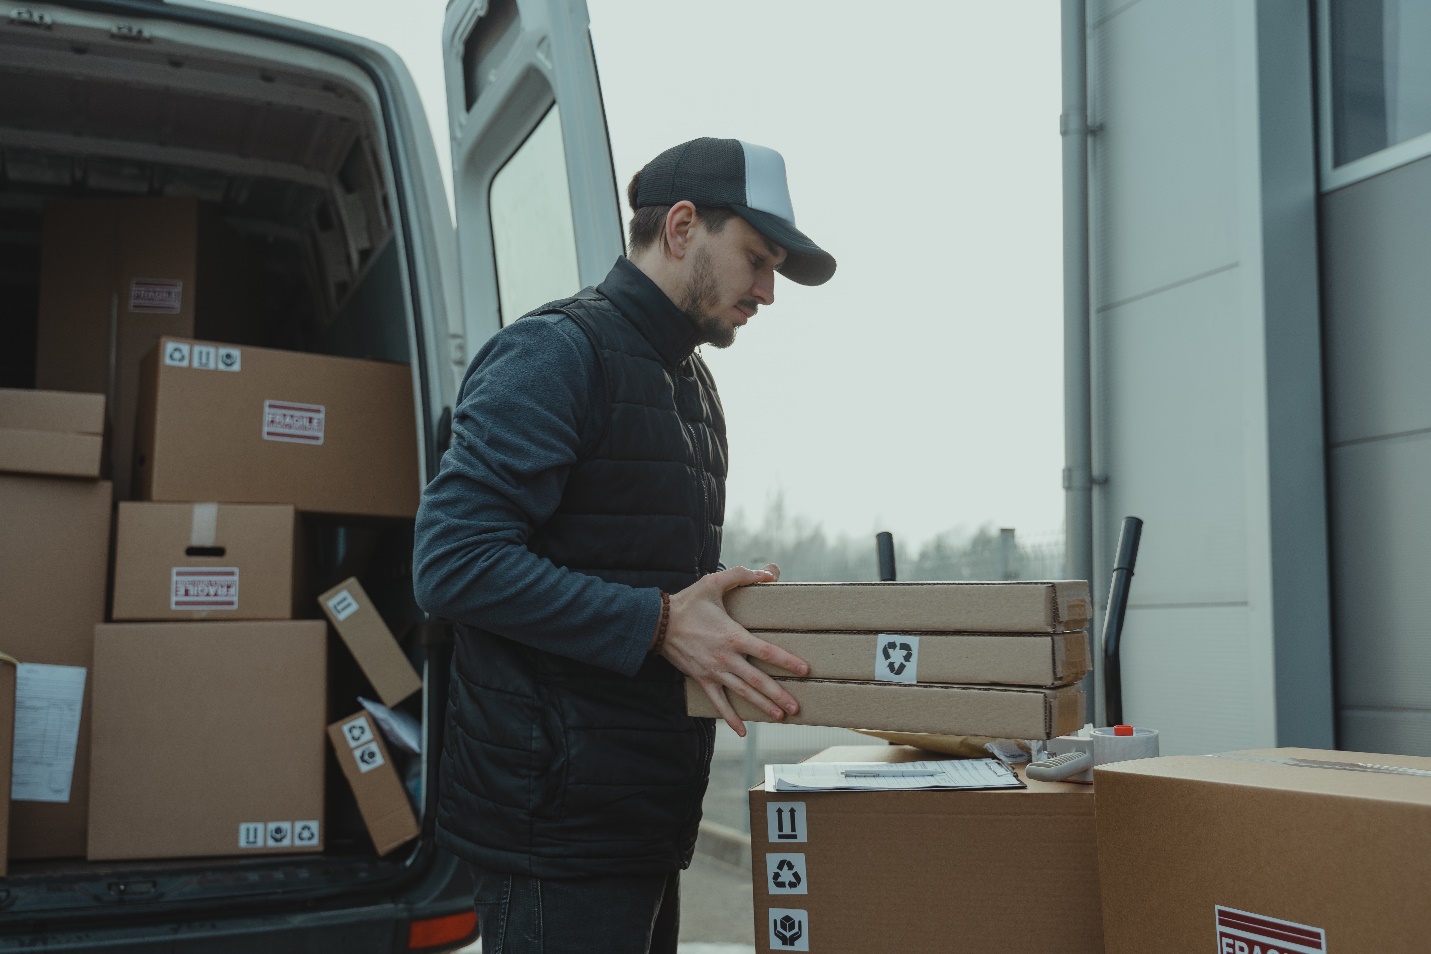 The Benefits of Partnering With a Reliable Wholesale Shipping Supply Company